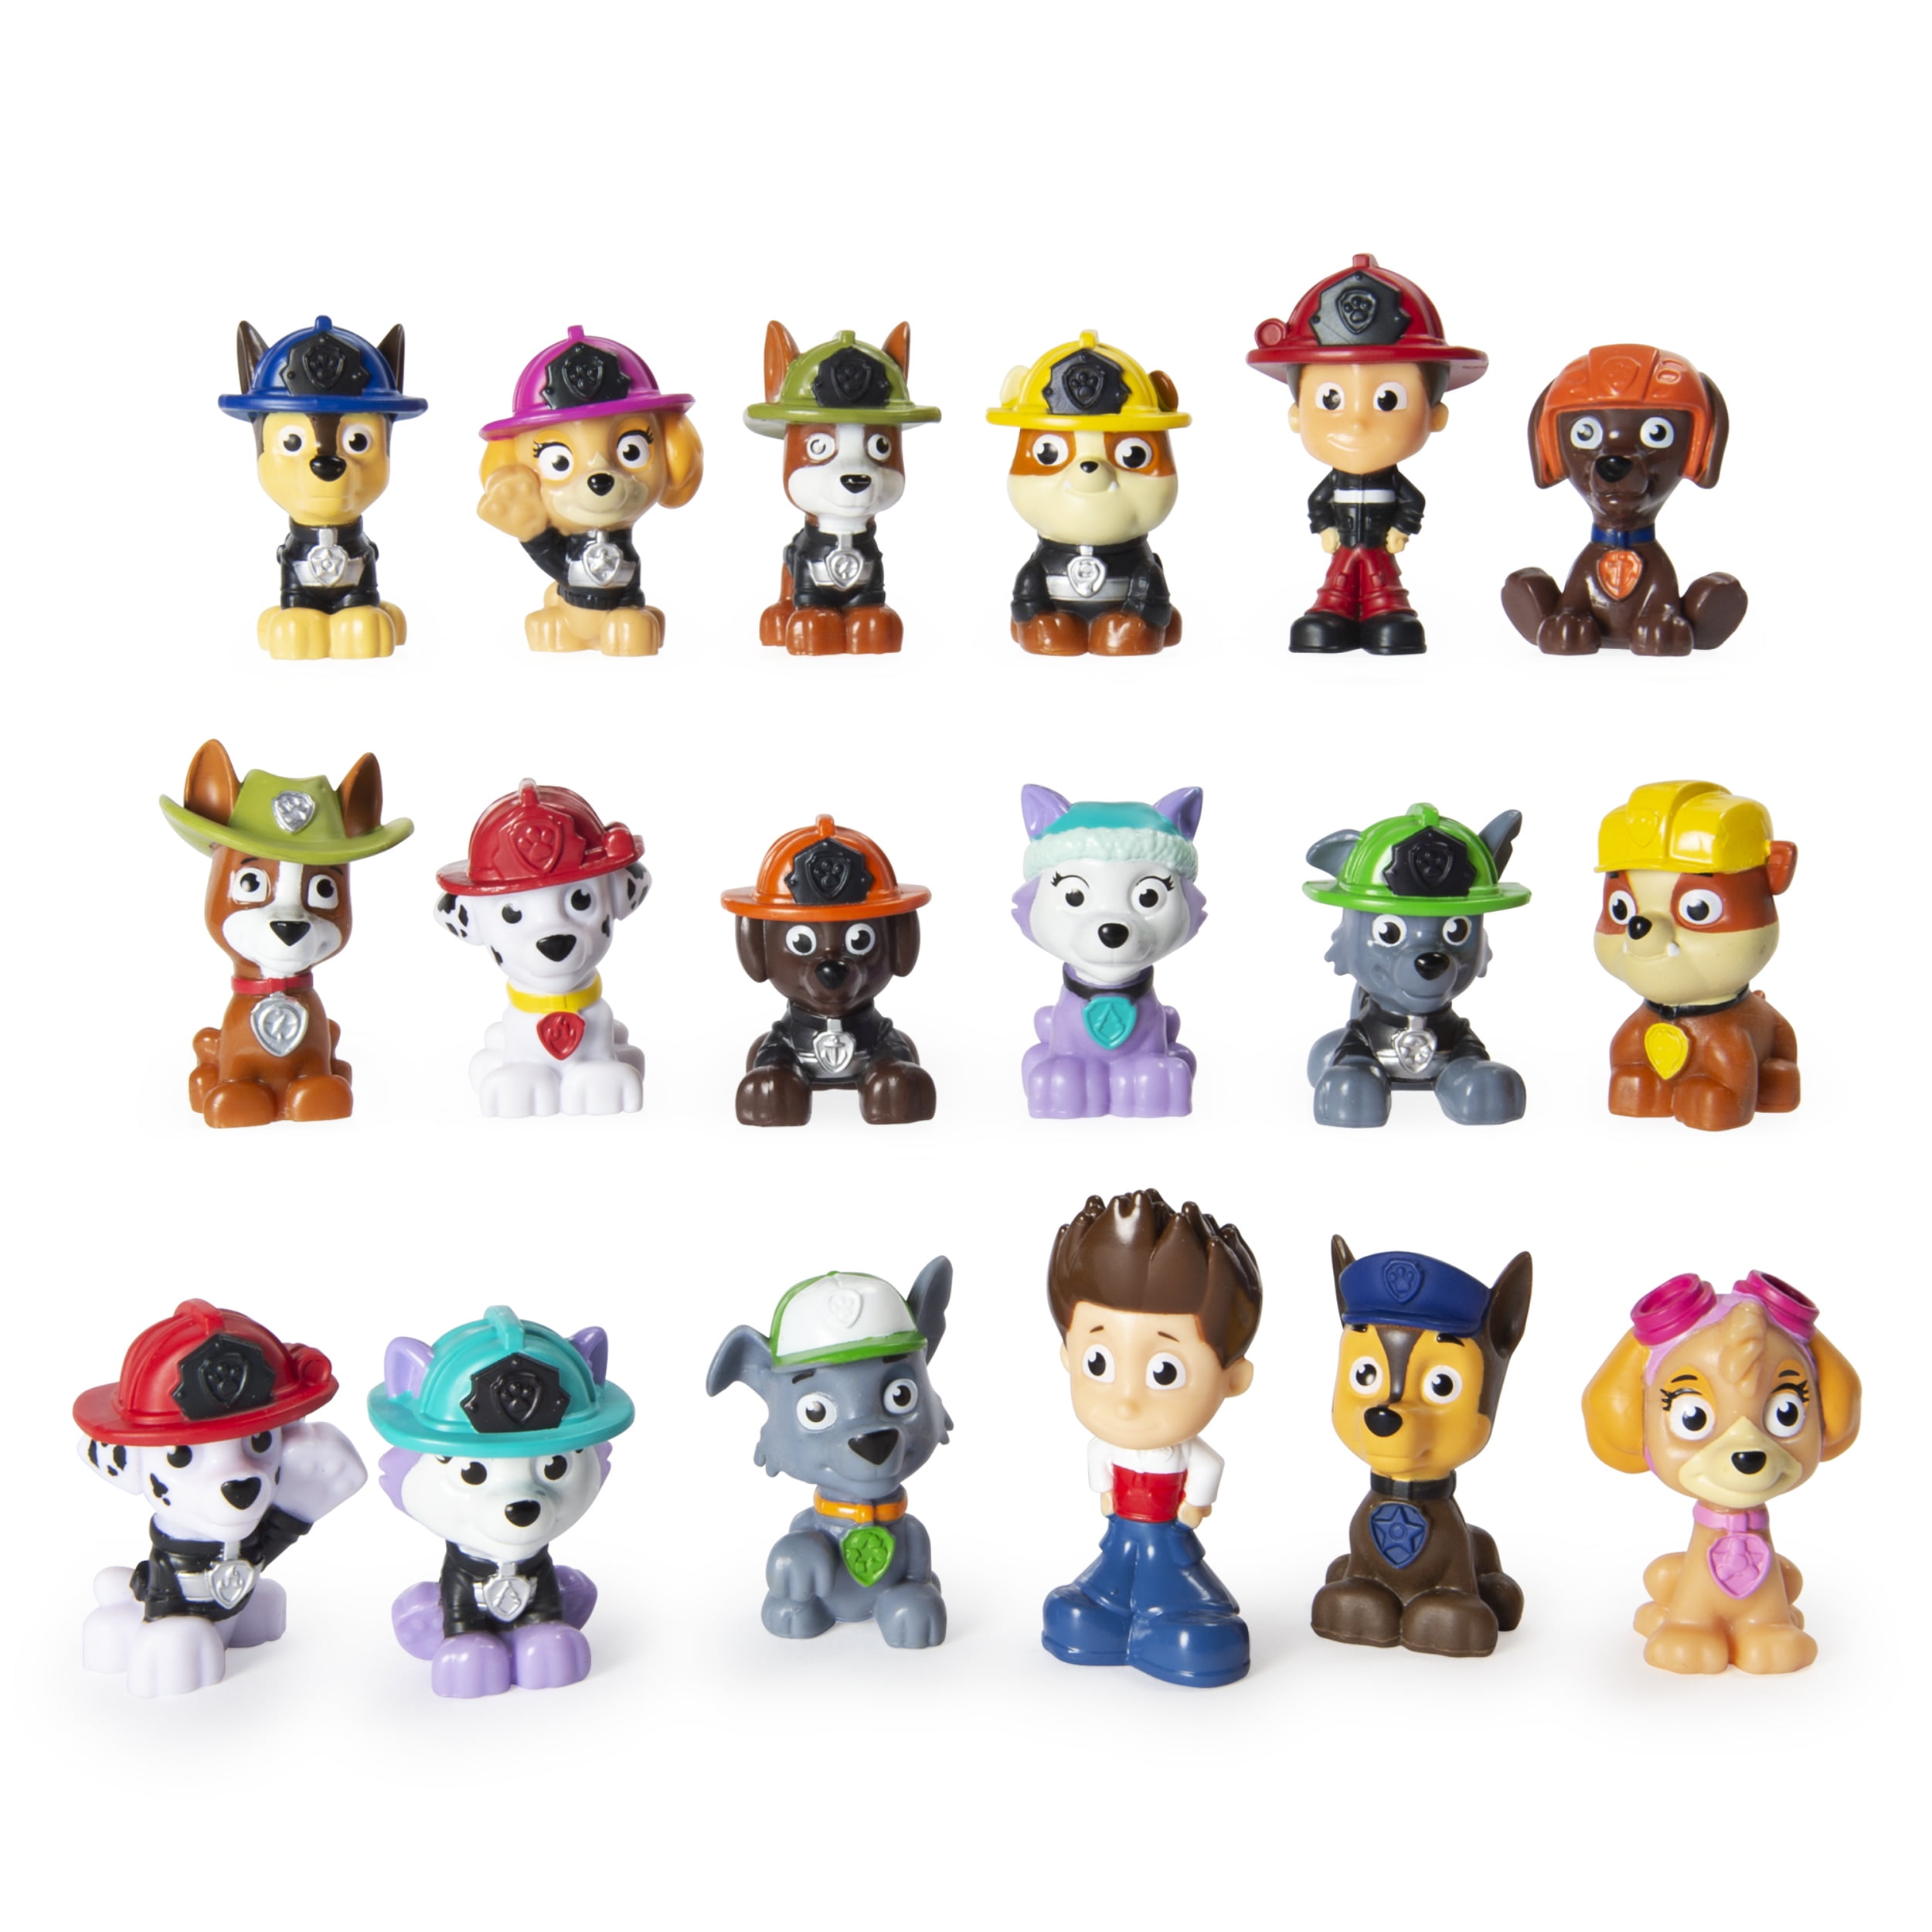 Store definitive Forfærde PAW Patrol Mini Rescue Blind Box of Collectible Characters Action Figure  Set - Walmart.com